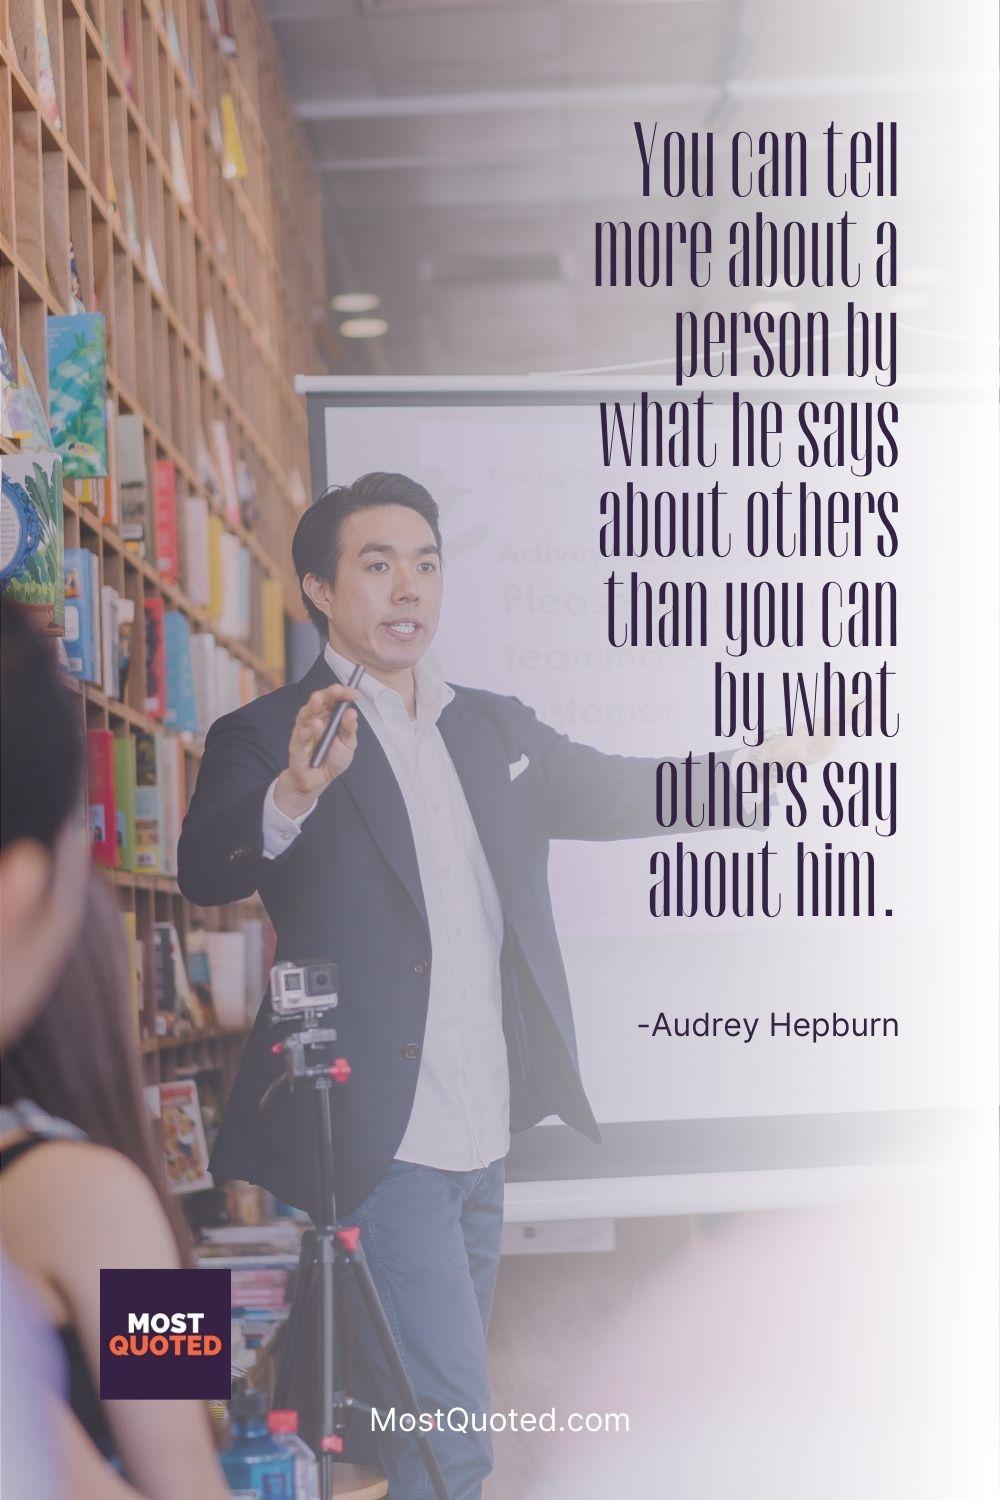 You can tell more about a person by what he says about others than you can by what others say about him. - Audrey Hepburn